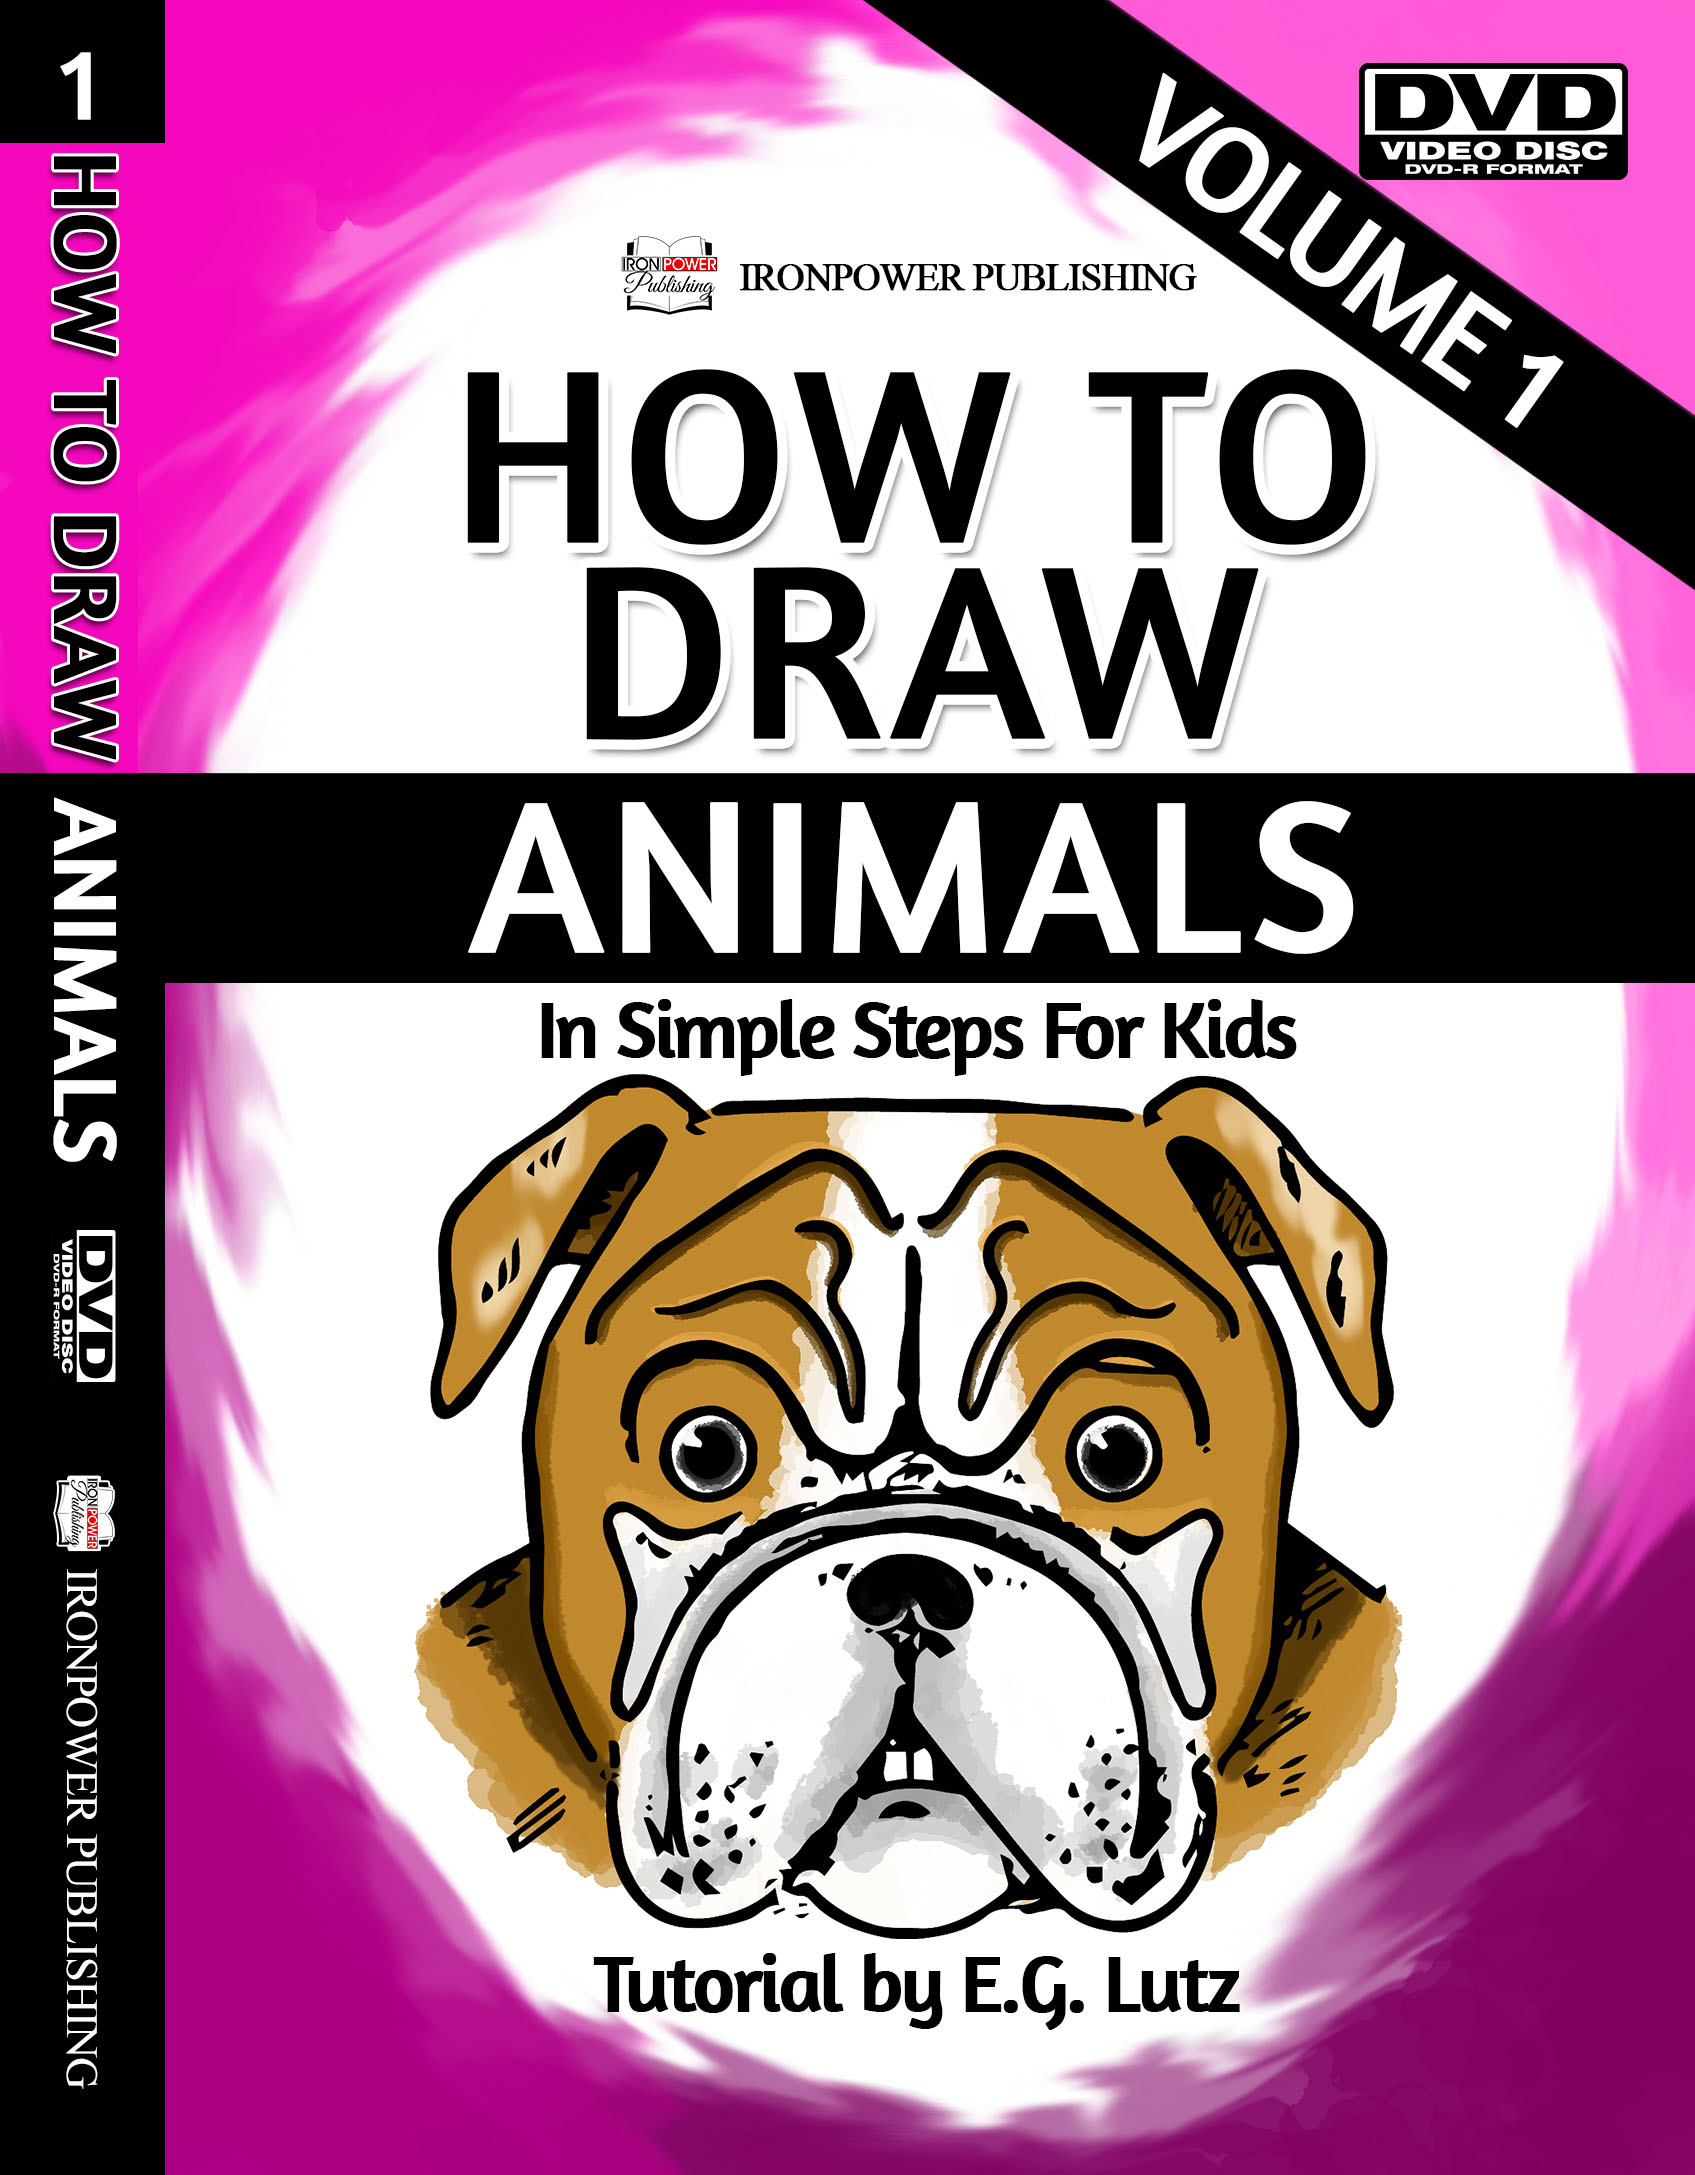 How to Draw Animals (In Simple Steps for Kids) Volume 1